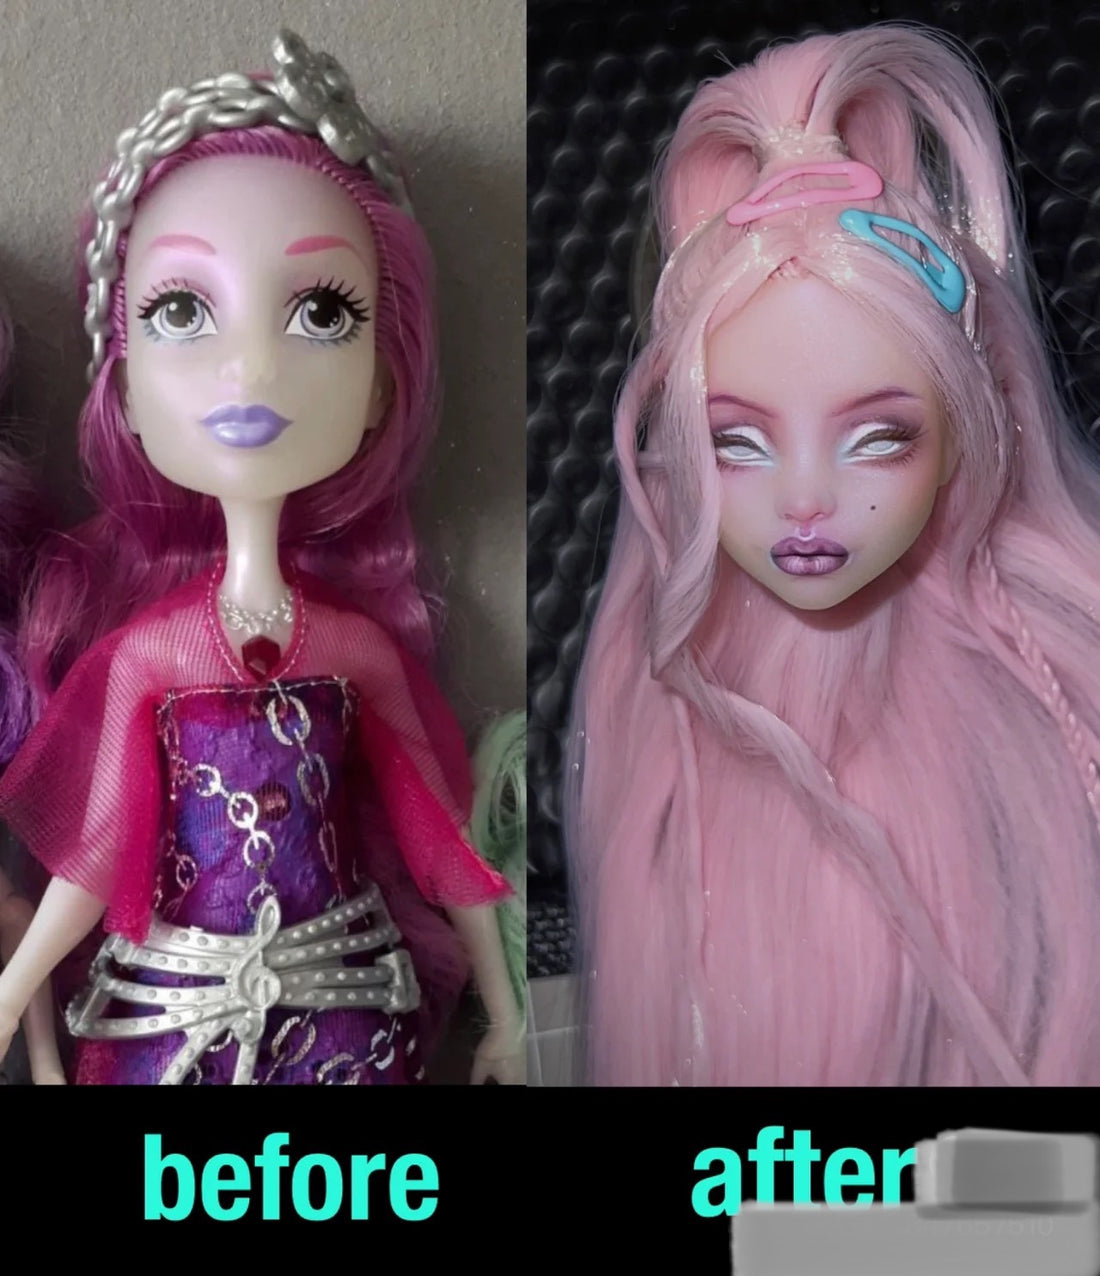 HOW TO REPAINT A M0NSTERHIGH DOLL 2022